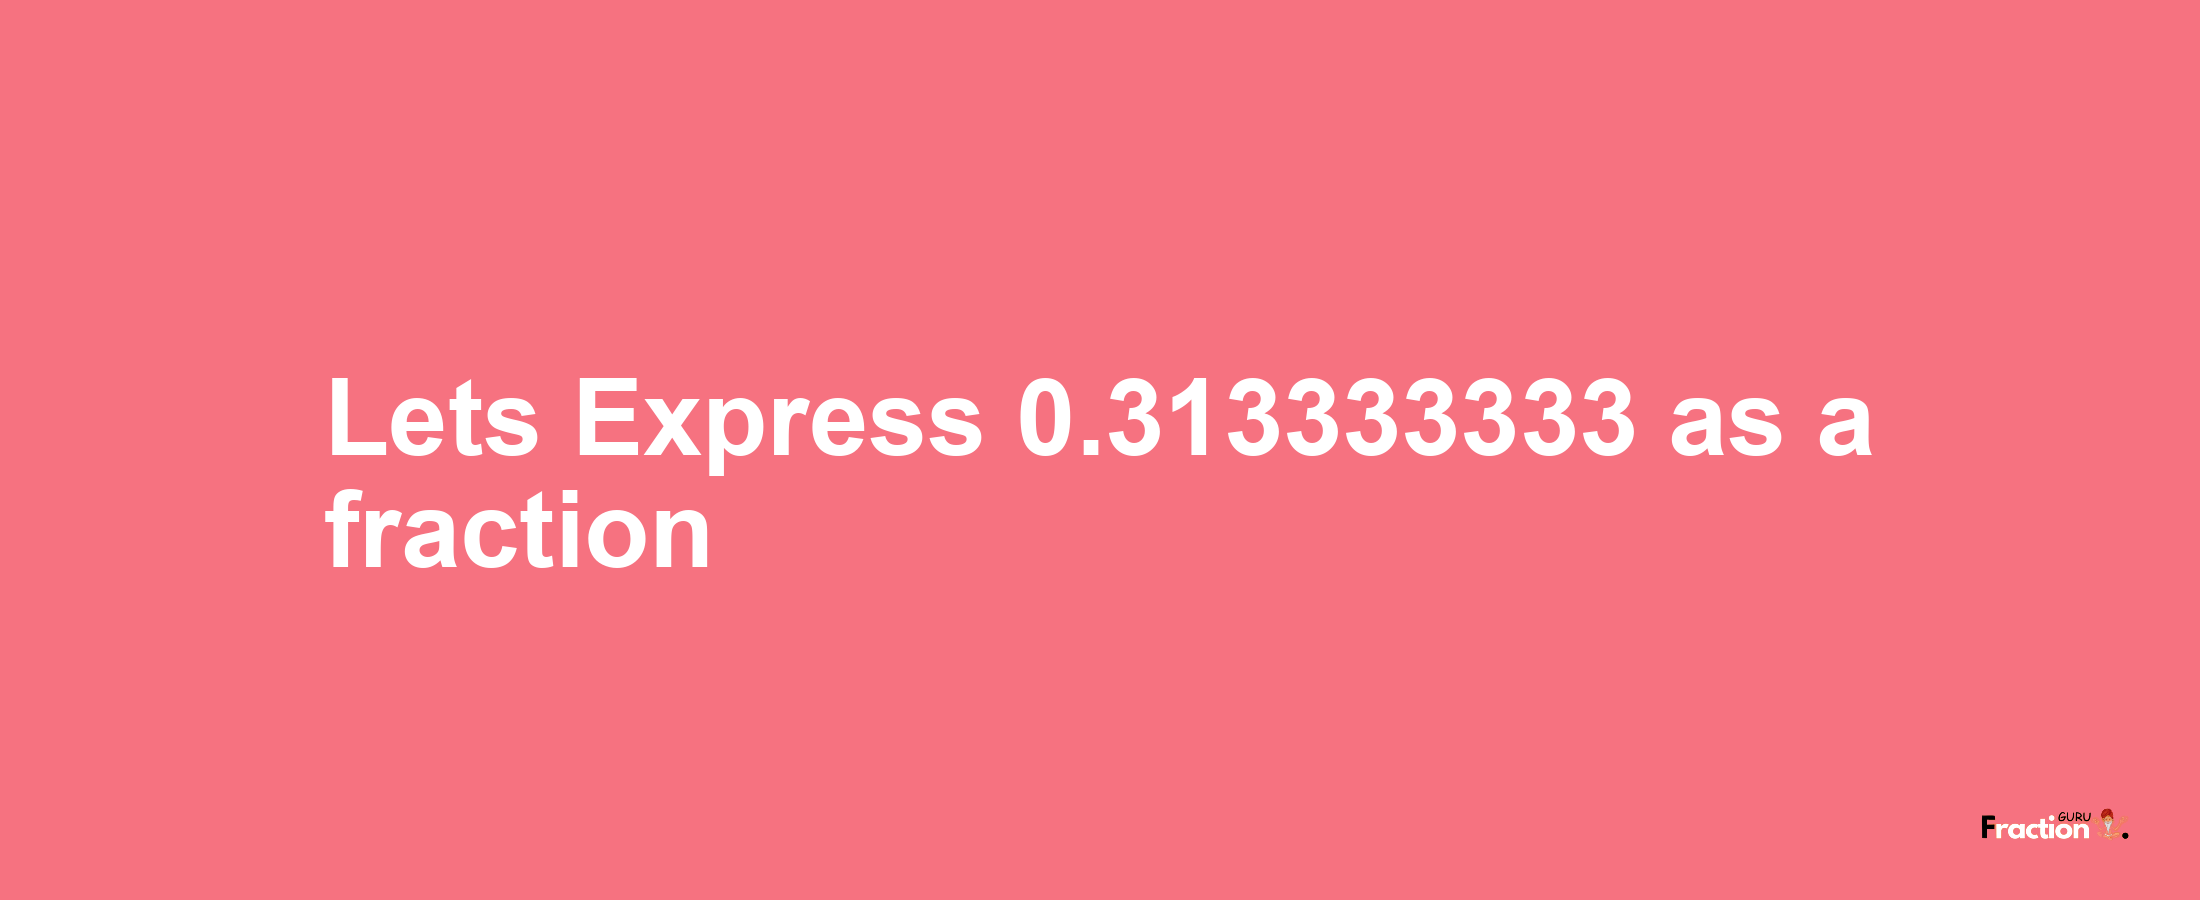 Lets Express 0.313333333 as afraction